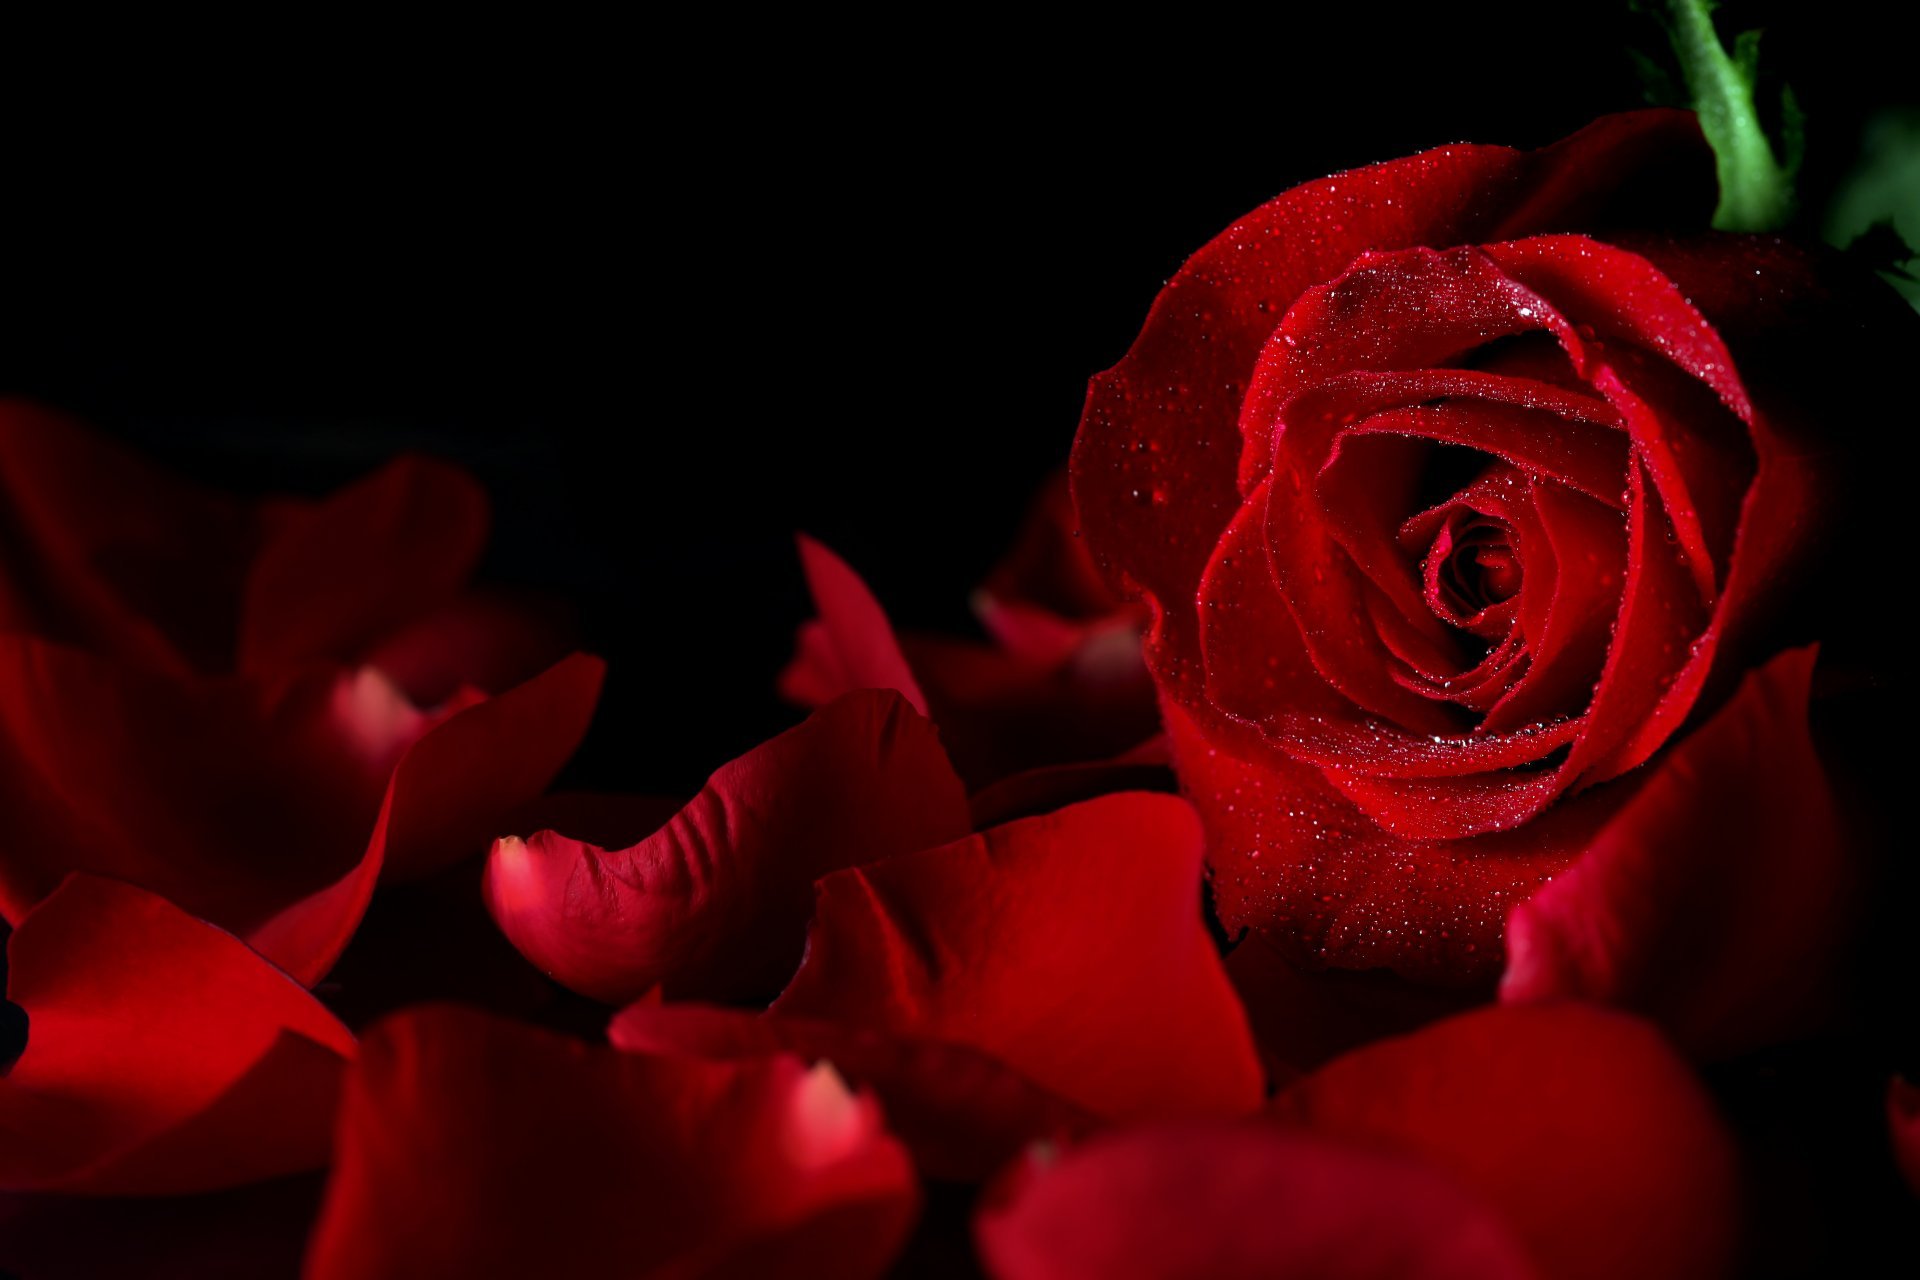 Red Rose With Black Background Hd Wallpaper - carrotapp